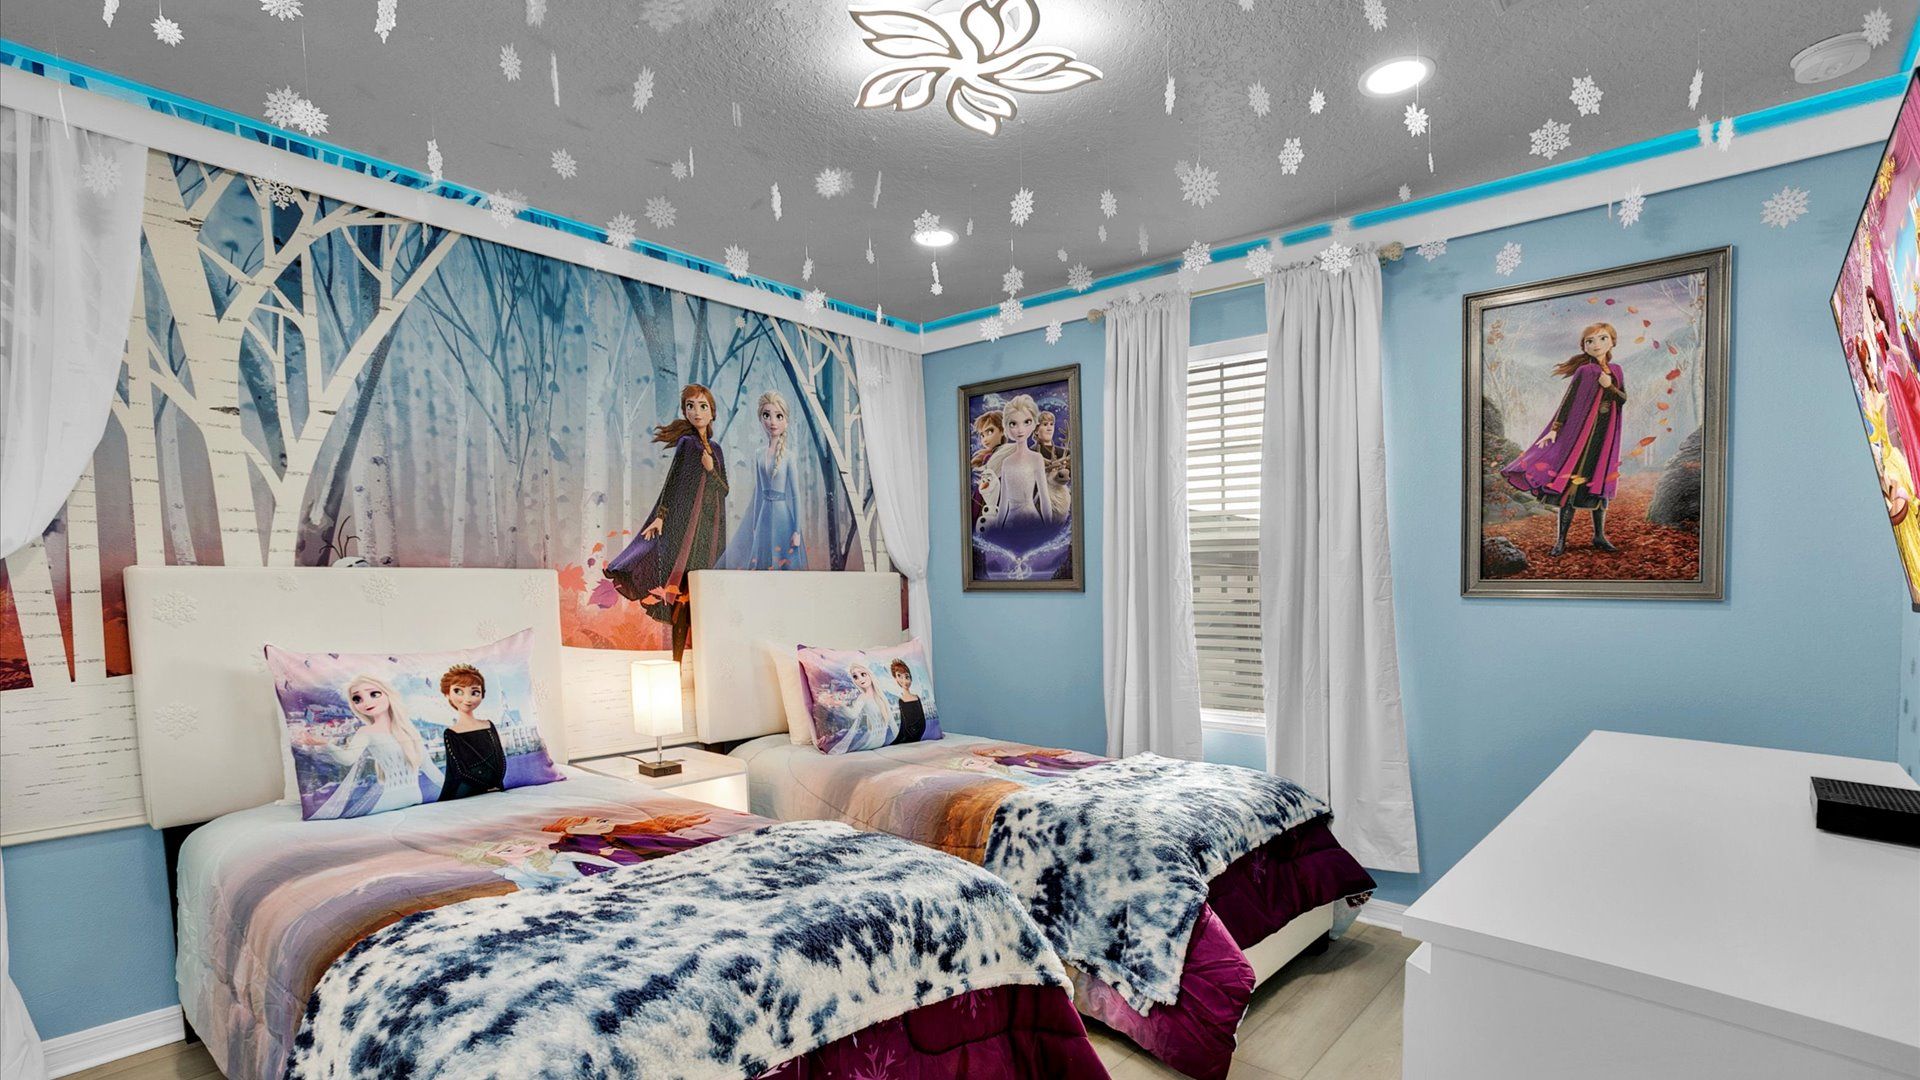 Two Twins Bedroom 4 Upstairs
Shared Bathroom
Frozen Theme